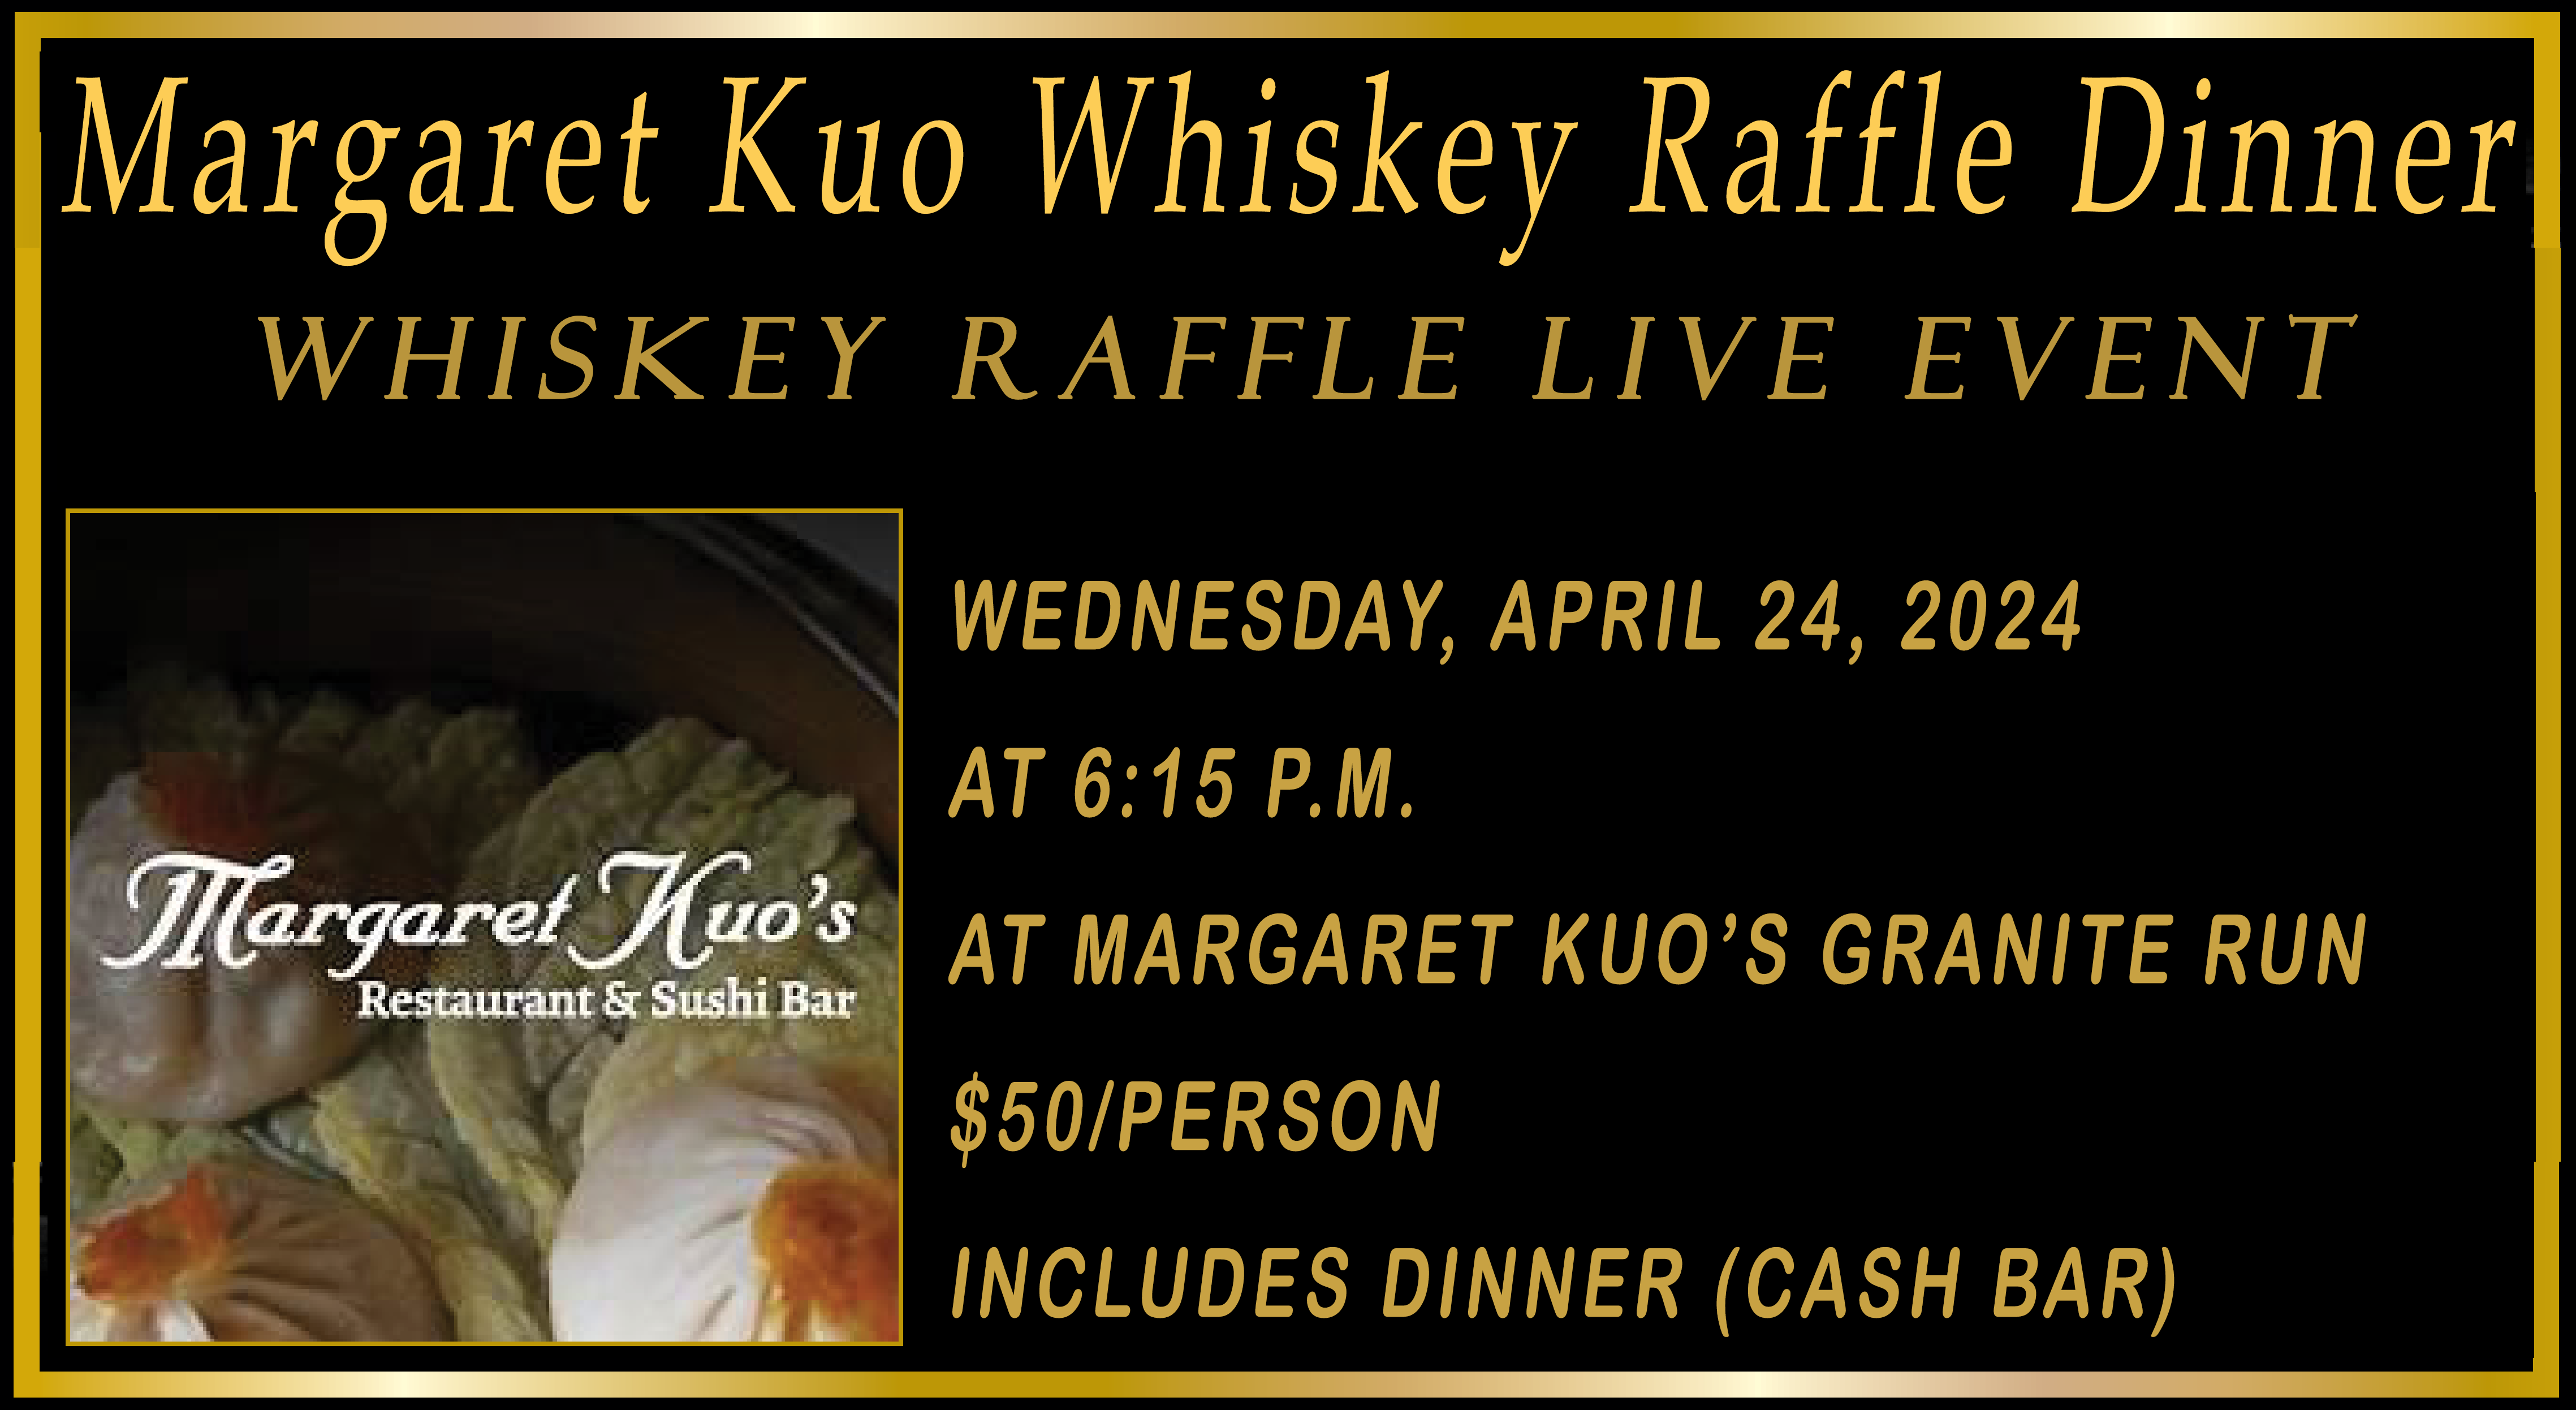 Thank you for your payment to the Rotary Club of Media for the Live Whiskey Raffle event.